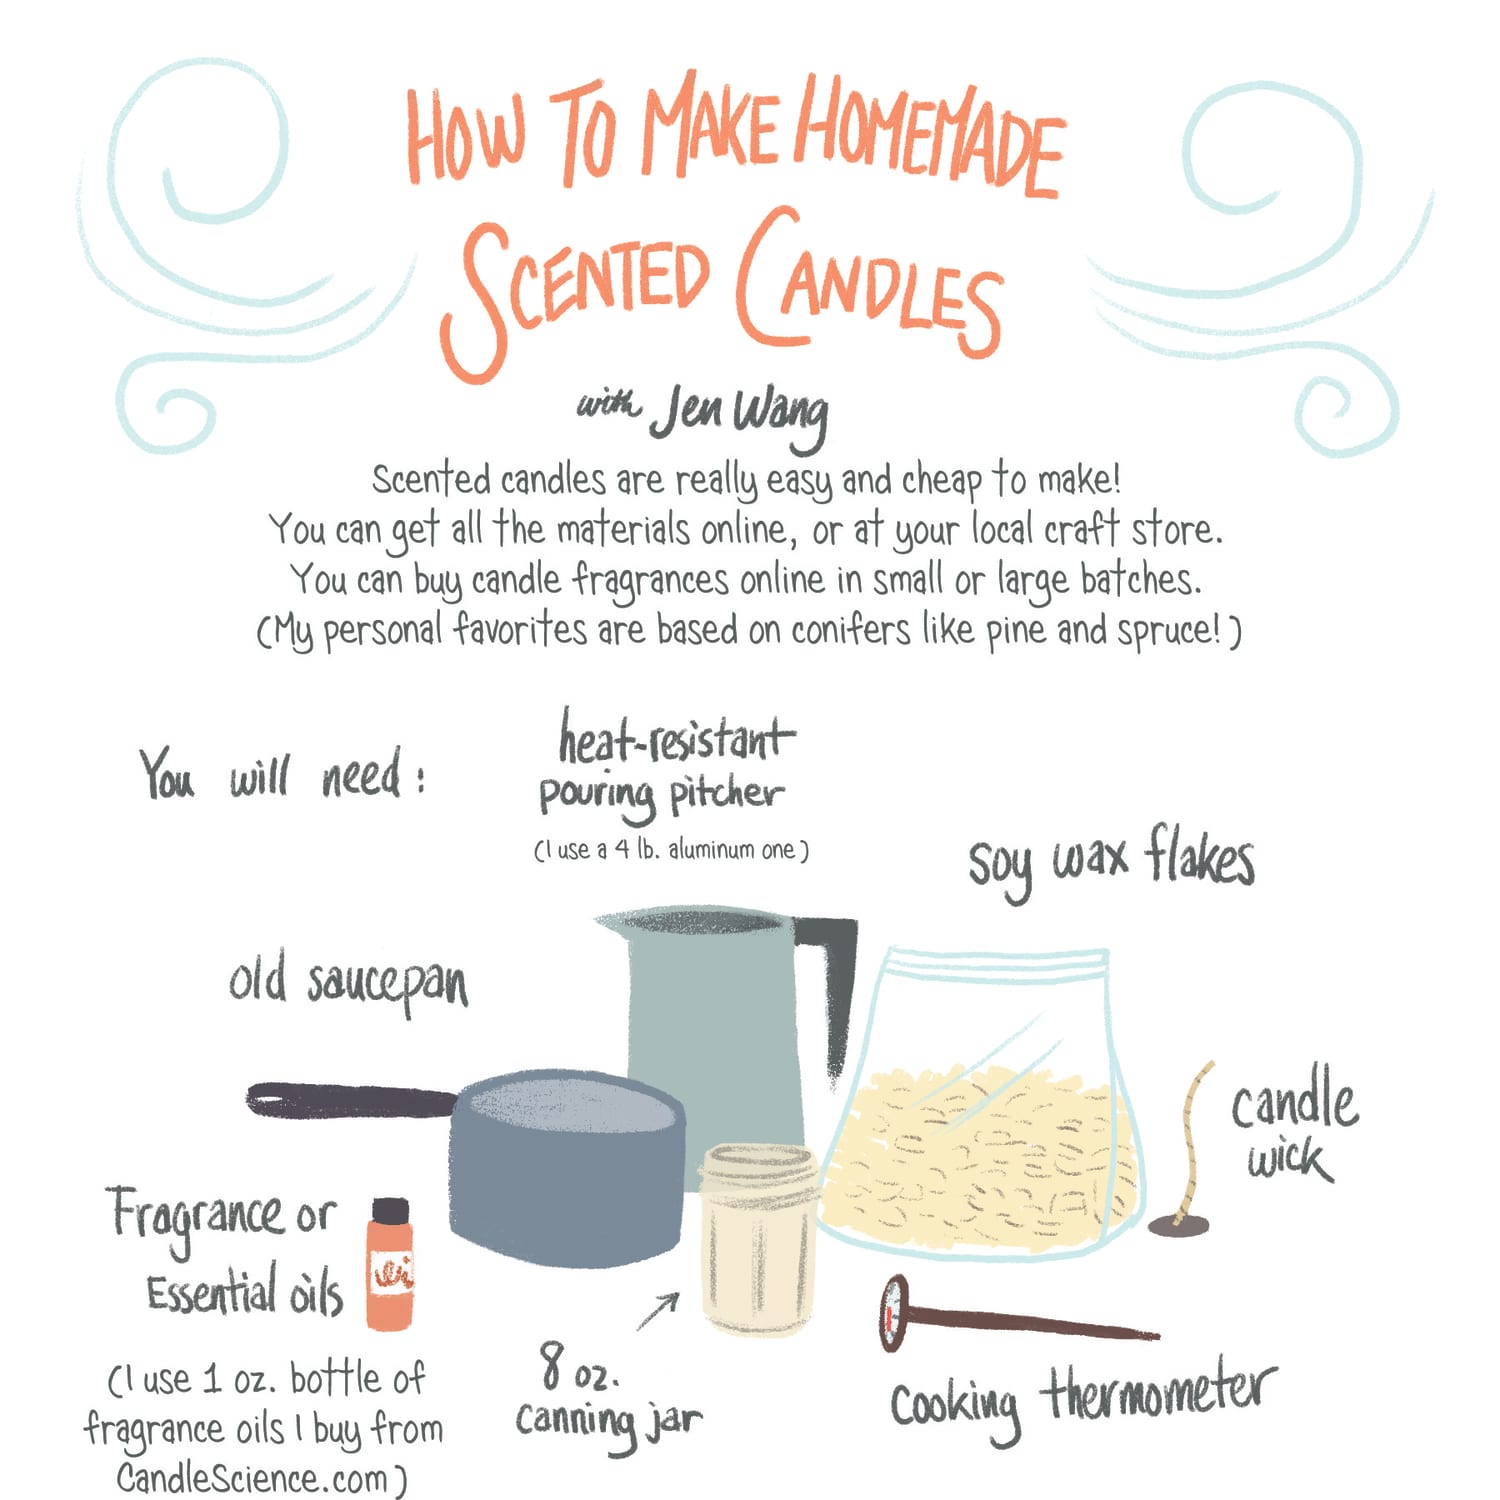 How To Make Homemade Scented Candles Apartment Therapy,Miniature Roses In Containers